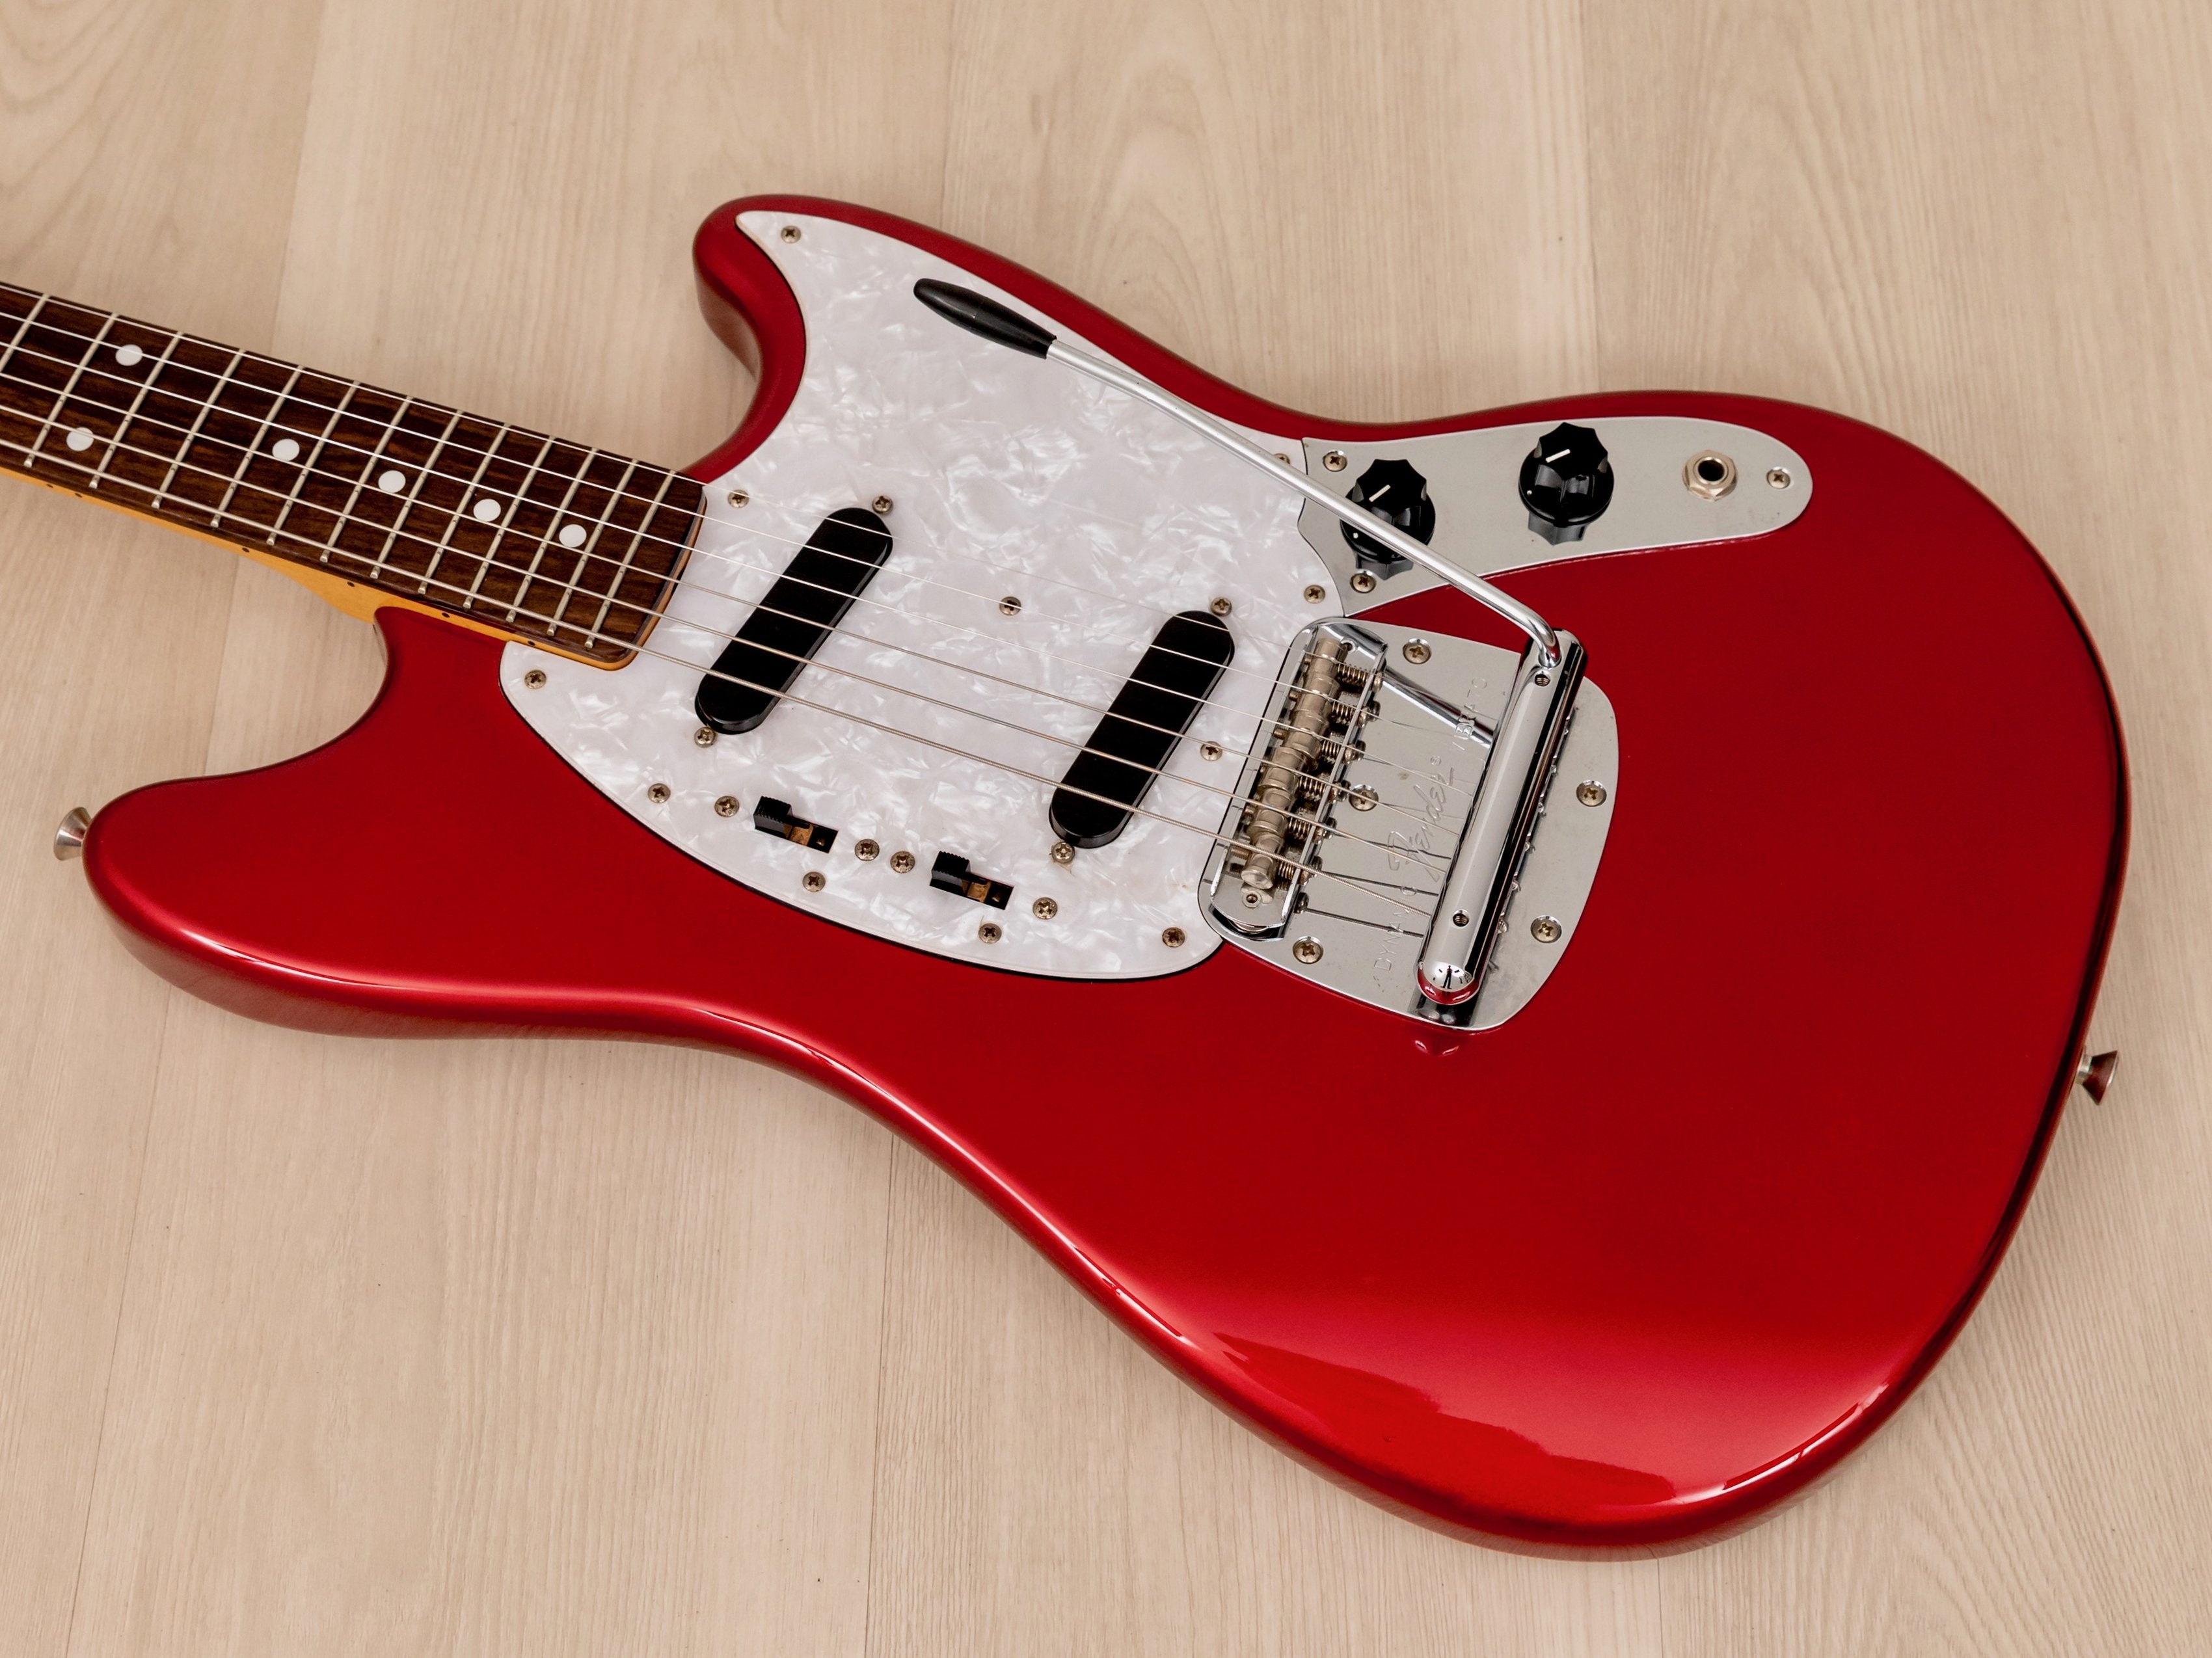 2010 Fender Mustang '69 Vintage Reissue MG69/MH Candy Apple Red, Japan MIJ